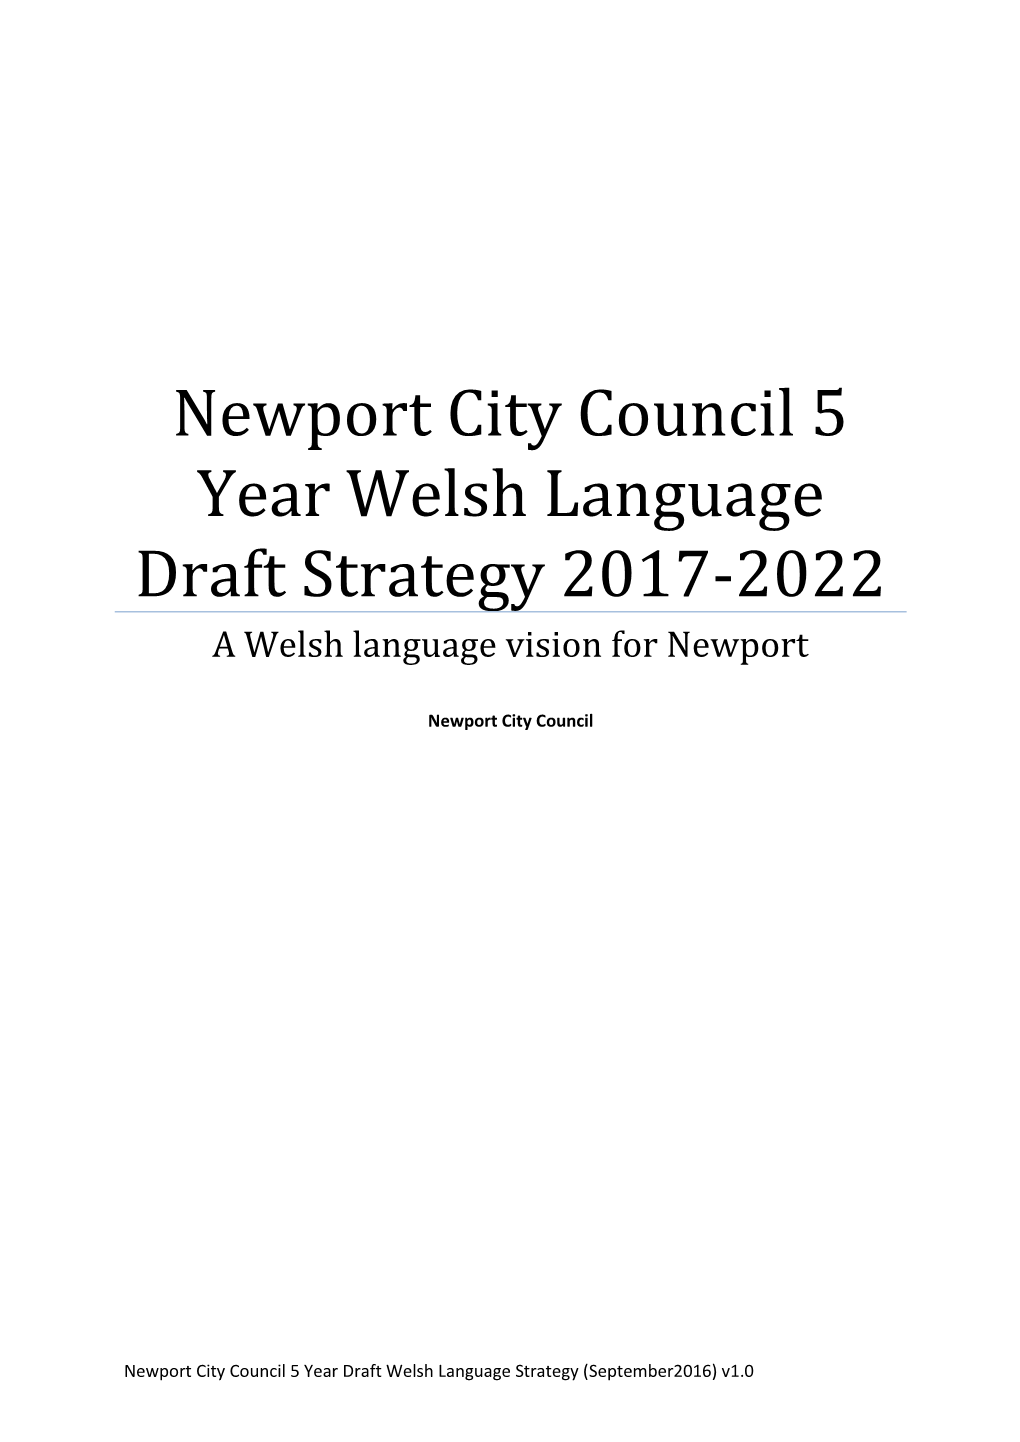 Newport City Council 5 Year Welsh Language Draft Strategy 2017-2022 a Welsh Language Vision for Newport